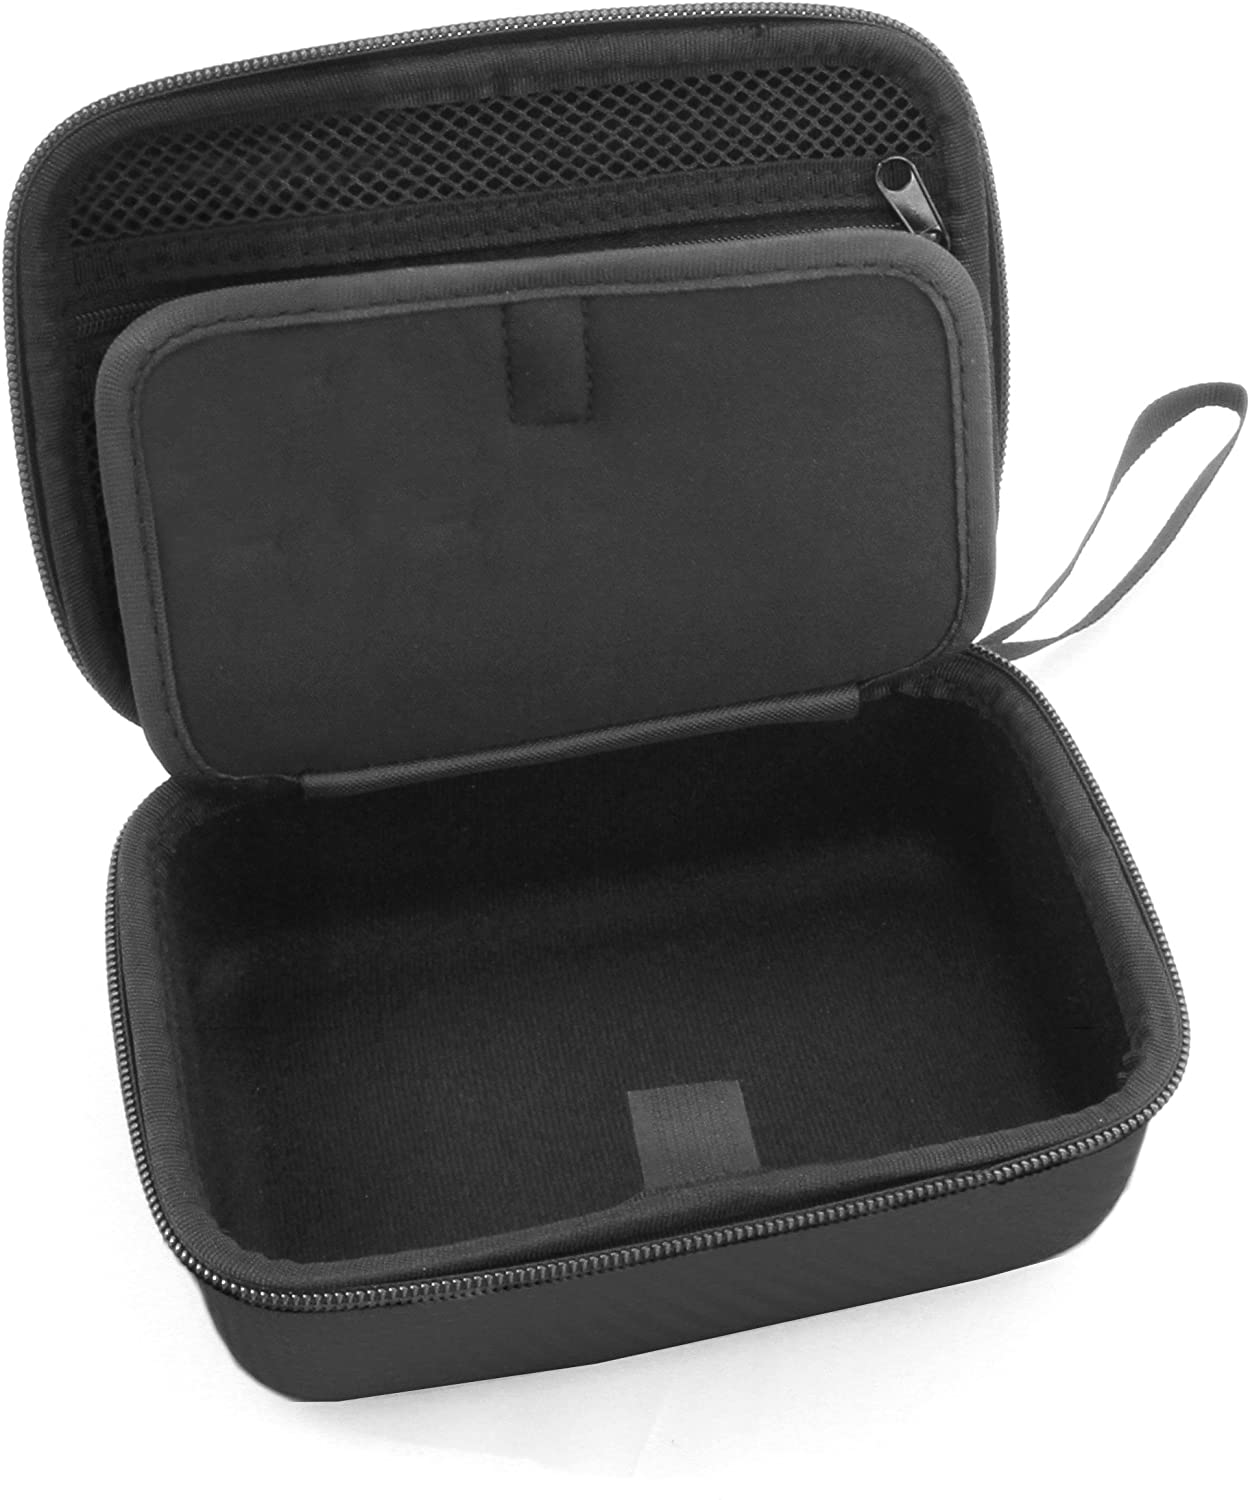 CASEMATIX Carry Case Compatible with Square Terminal POS System Reader ...